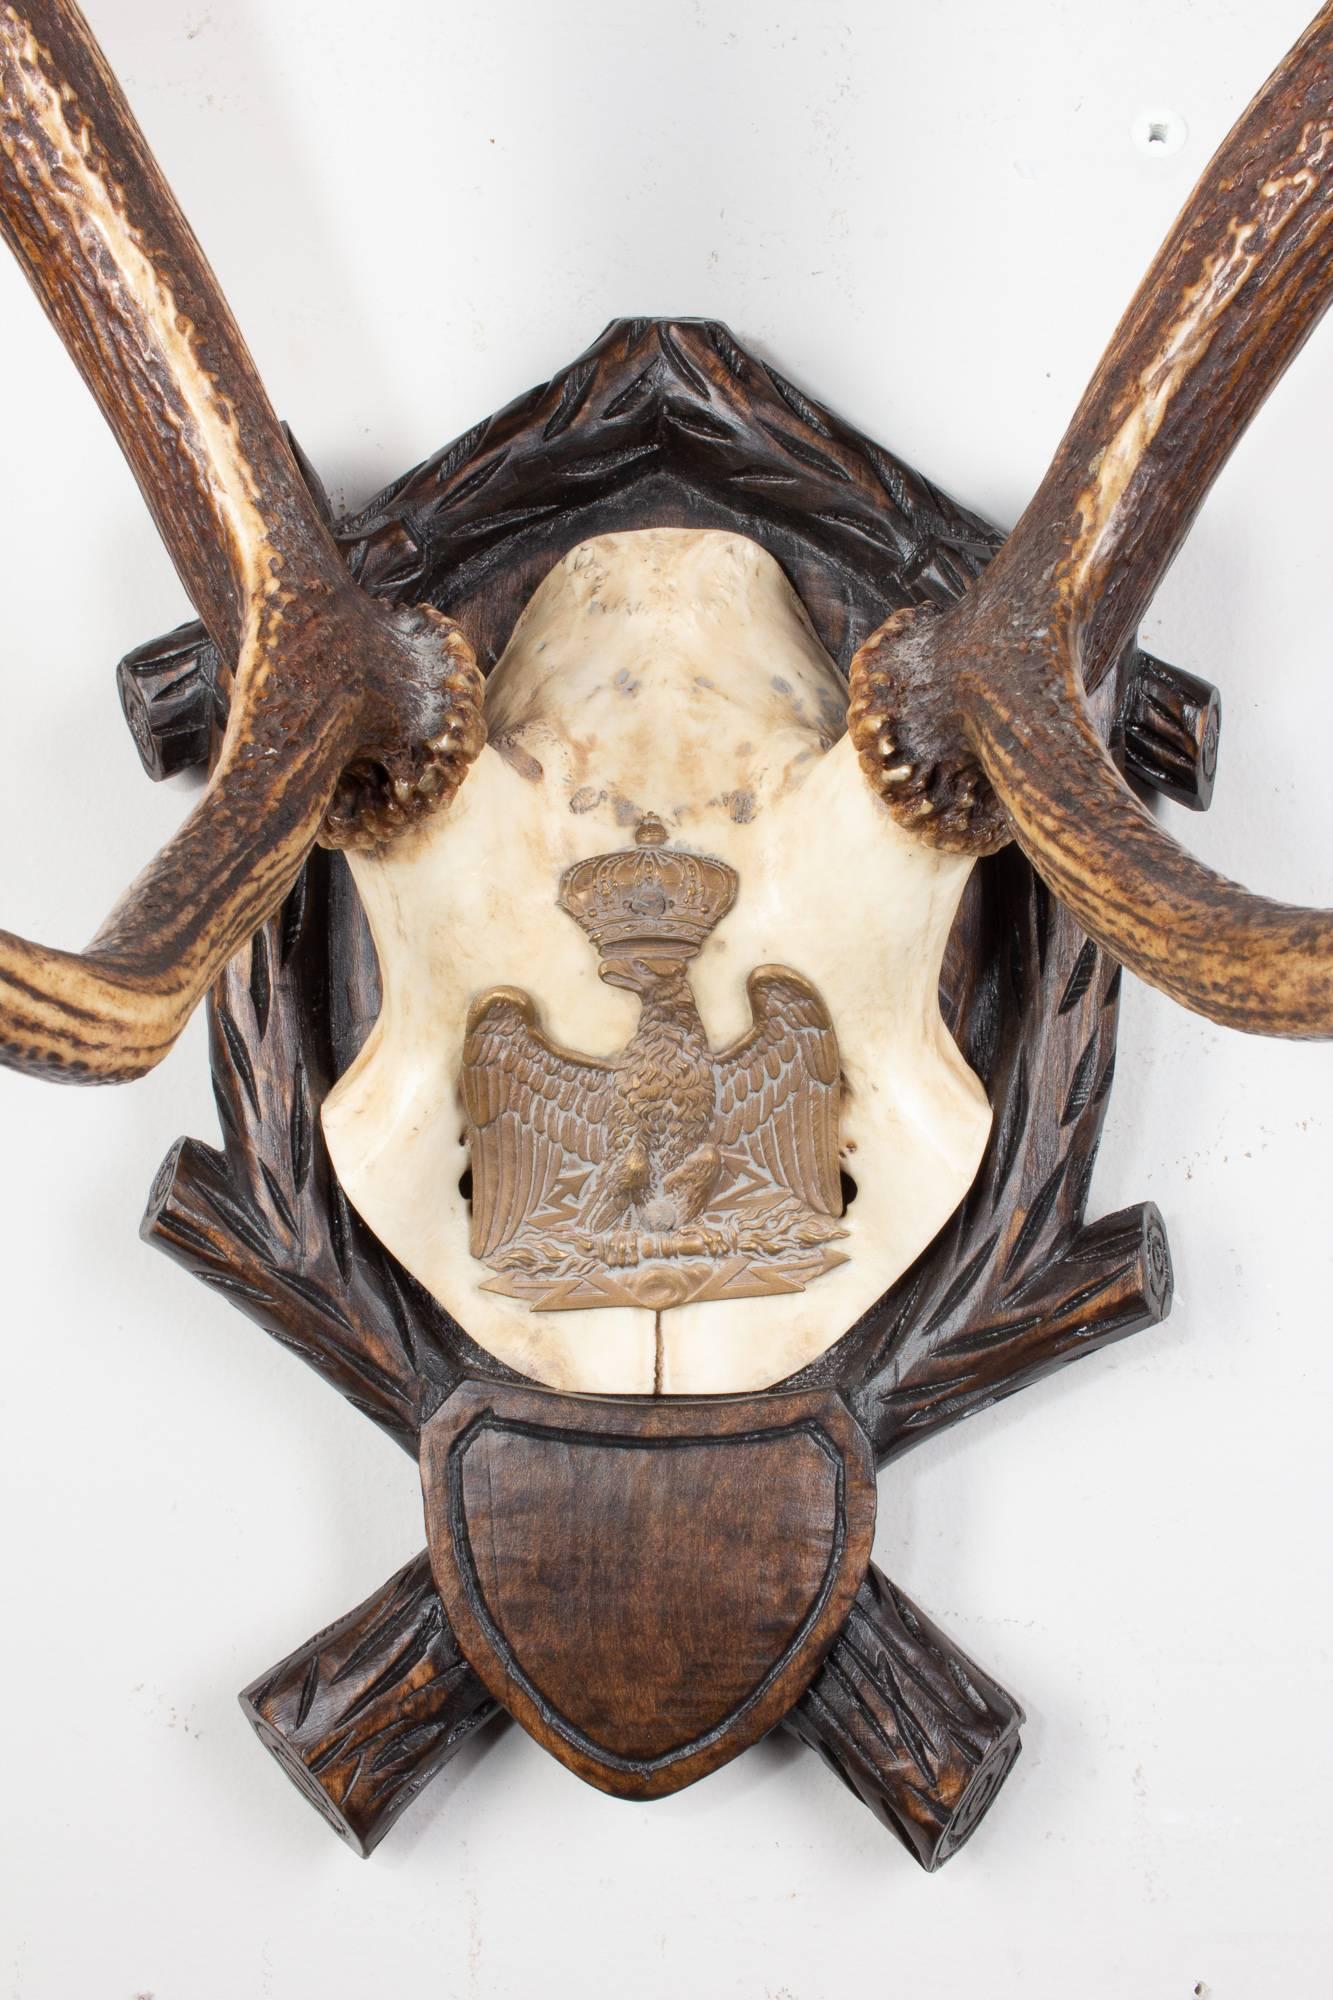 19th century Austrian red stag on original Black Forest carved plaque that hung in Emperor Franz Josef's castle at Eckartsau in the Southern Austrian Alps. Eckartsau was a favorite hunting schloss of the Habsburg family. The plaque itself is an